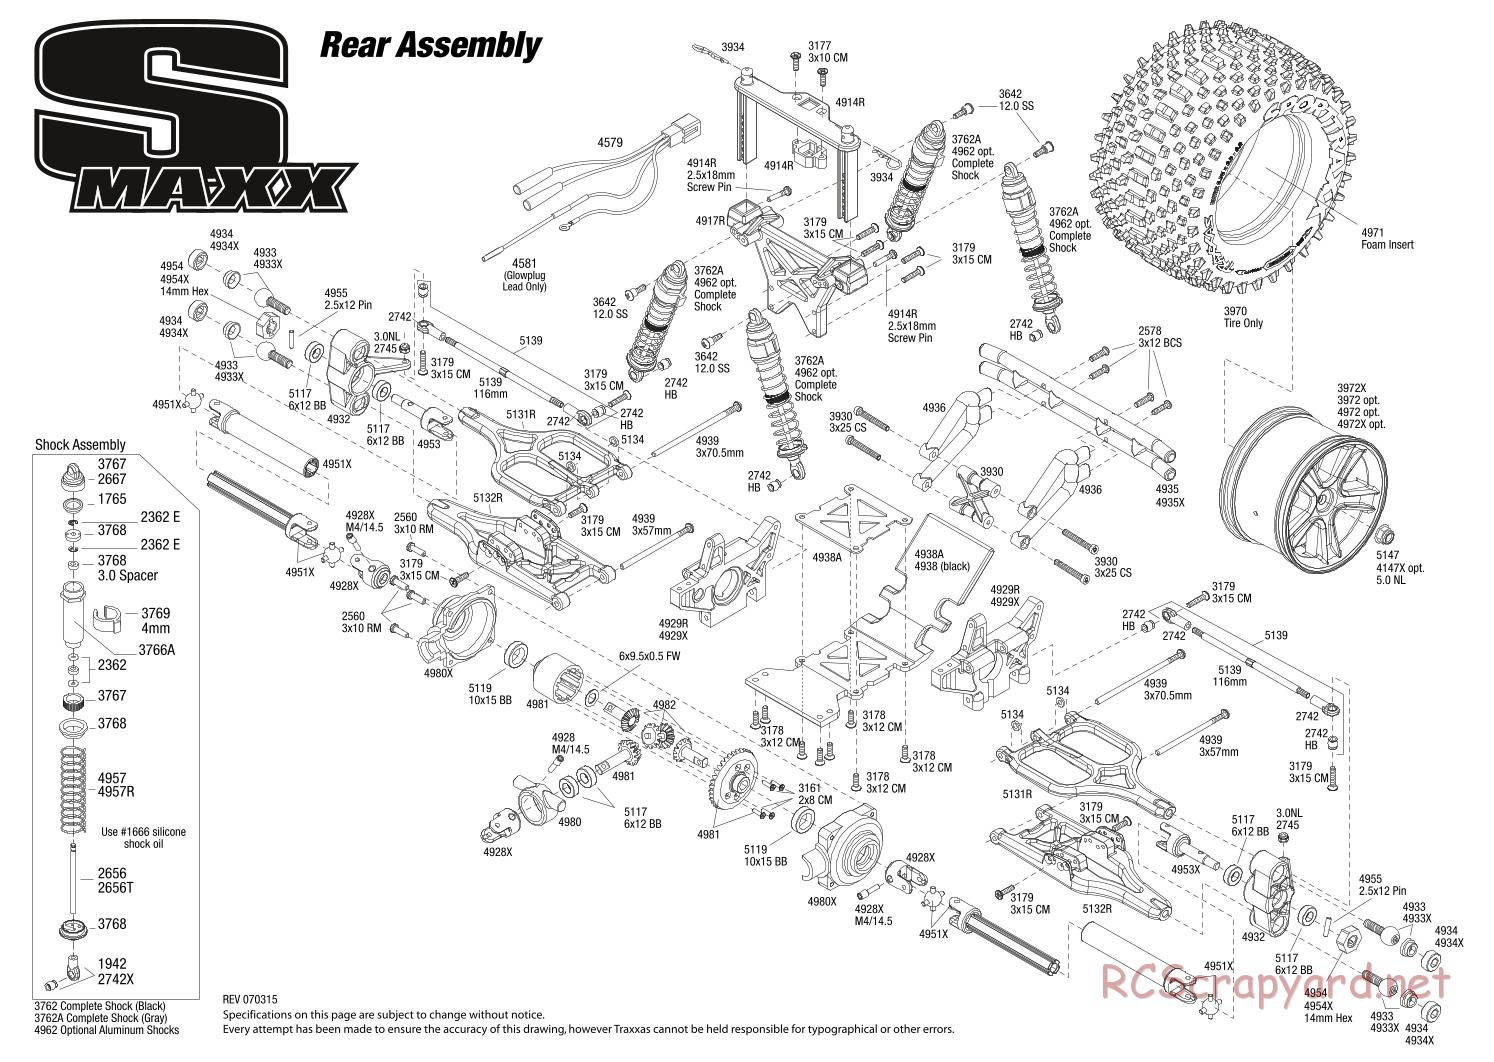 Traxxas - S-Maxx 2.5 (2004) - Exploded Views - Page 3